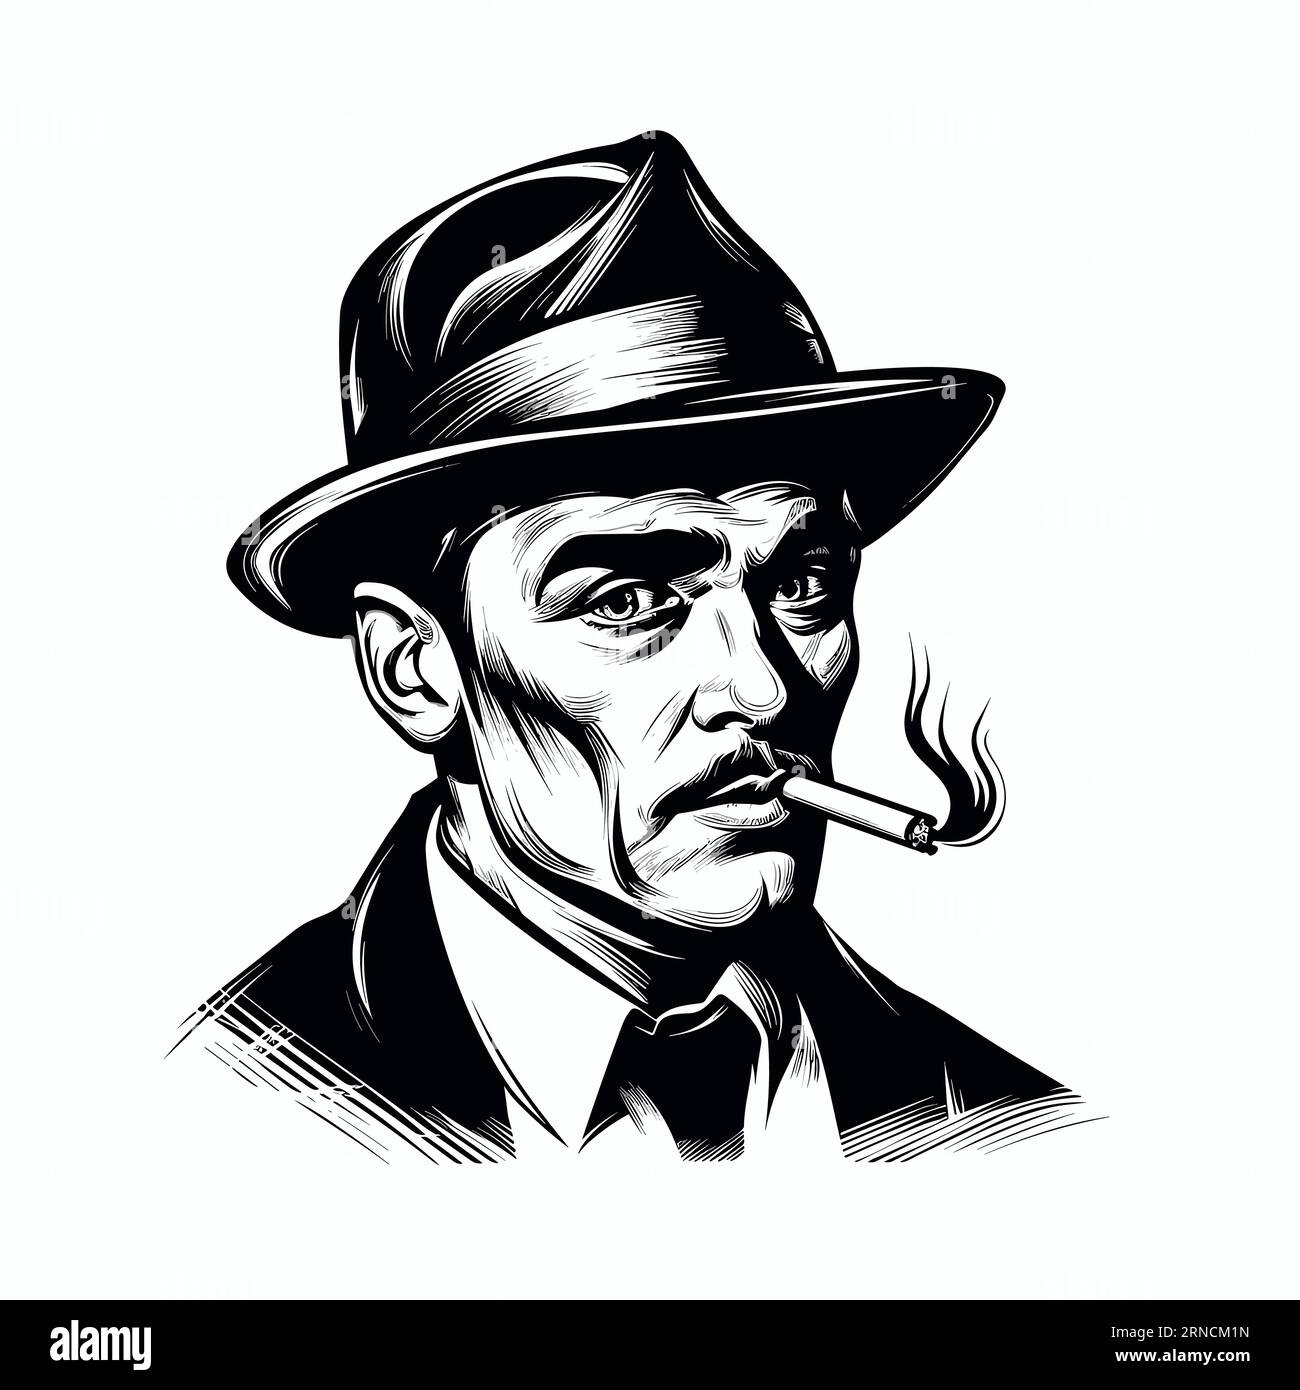 The Image Is A Man in A Hat Smoking A Cigarette, in the Style of Comic Book Noir, strong Facial Expression, Clean and Sharp Inking, Hard Edge Illustrazione Vettoriale